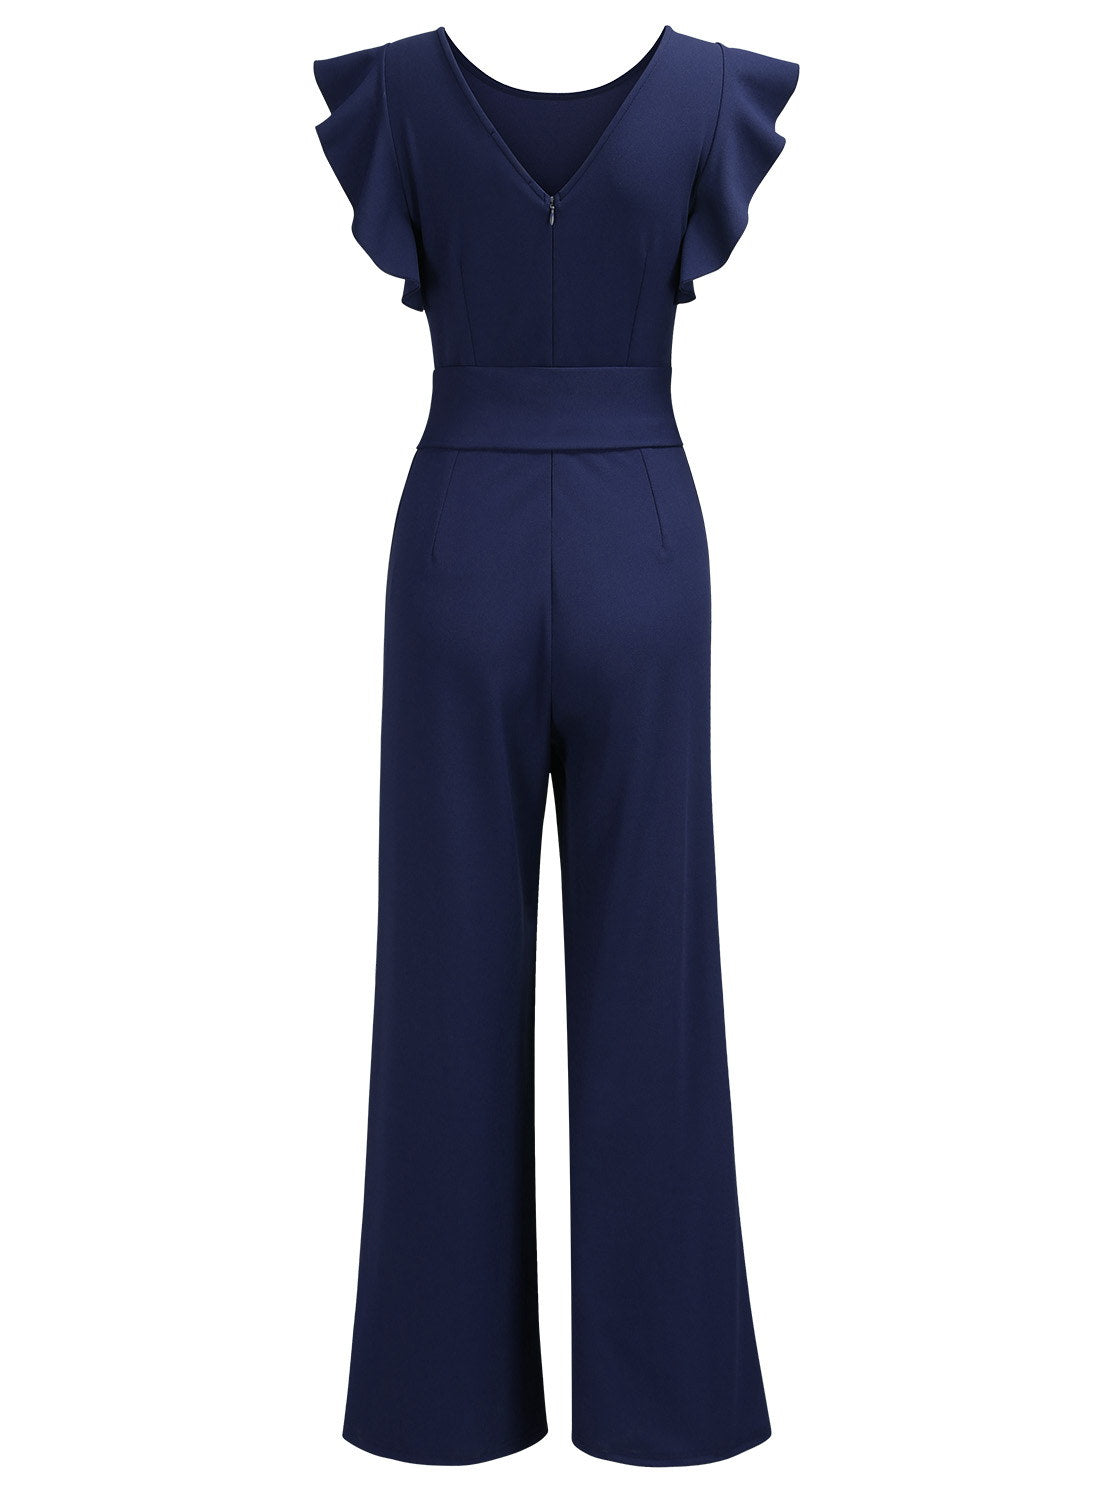 Women Wear Navy Blue Jumpsuits for Prom Formal Occasion New Style Ruffles  Neckline Long Sleeves Pant Suits Evening Party Gowns - AliExpress